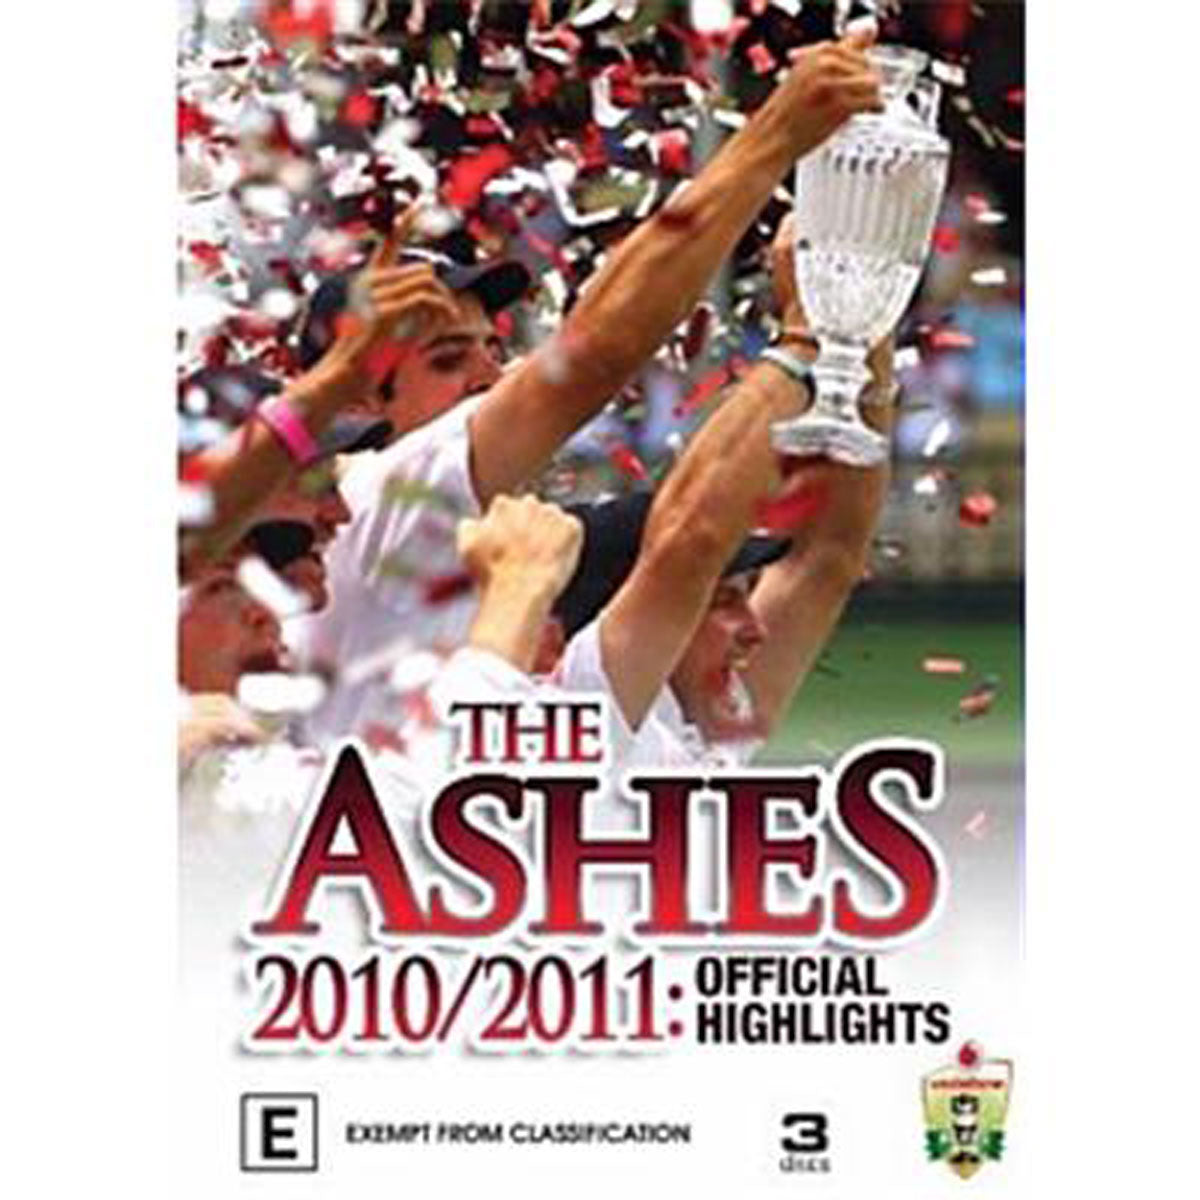 The Ashes 2010/2011 Official Highlights